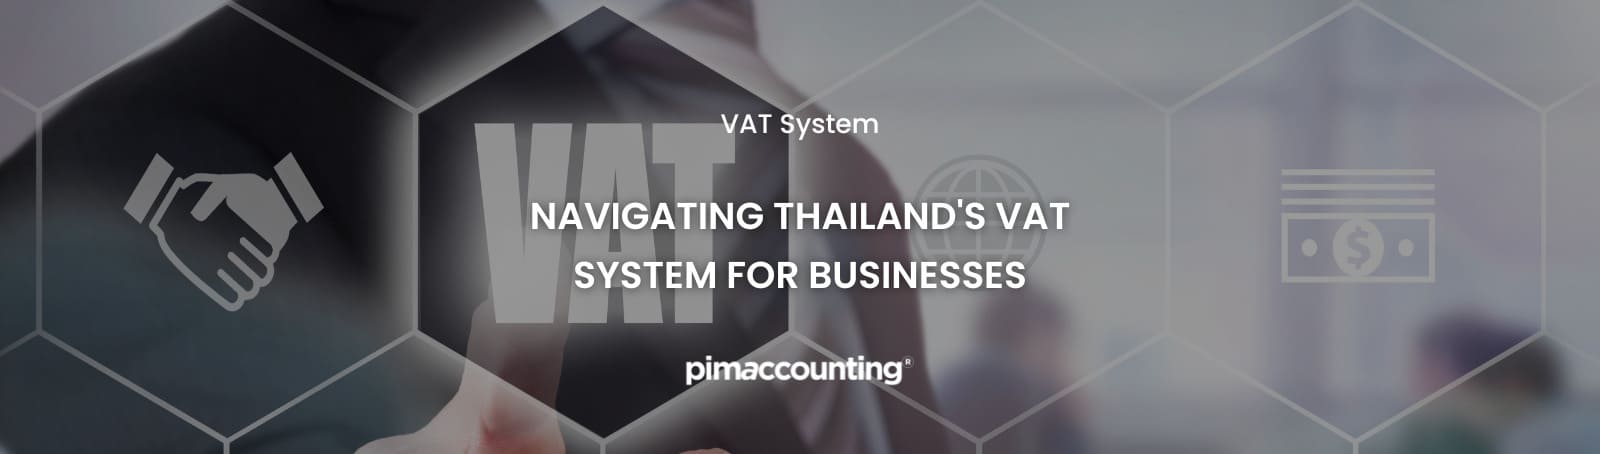 Navigating Thailand's VAT System for Businesses - Pimaccounting